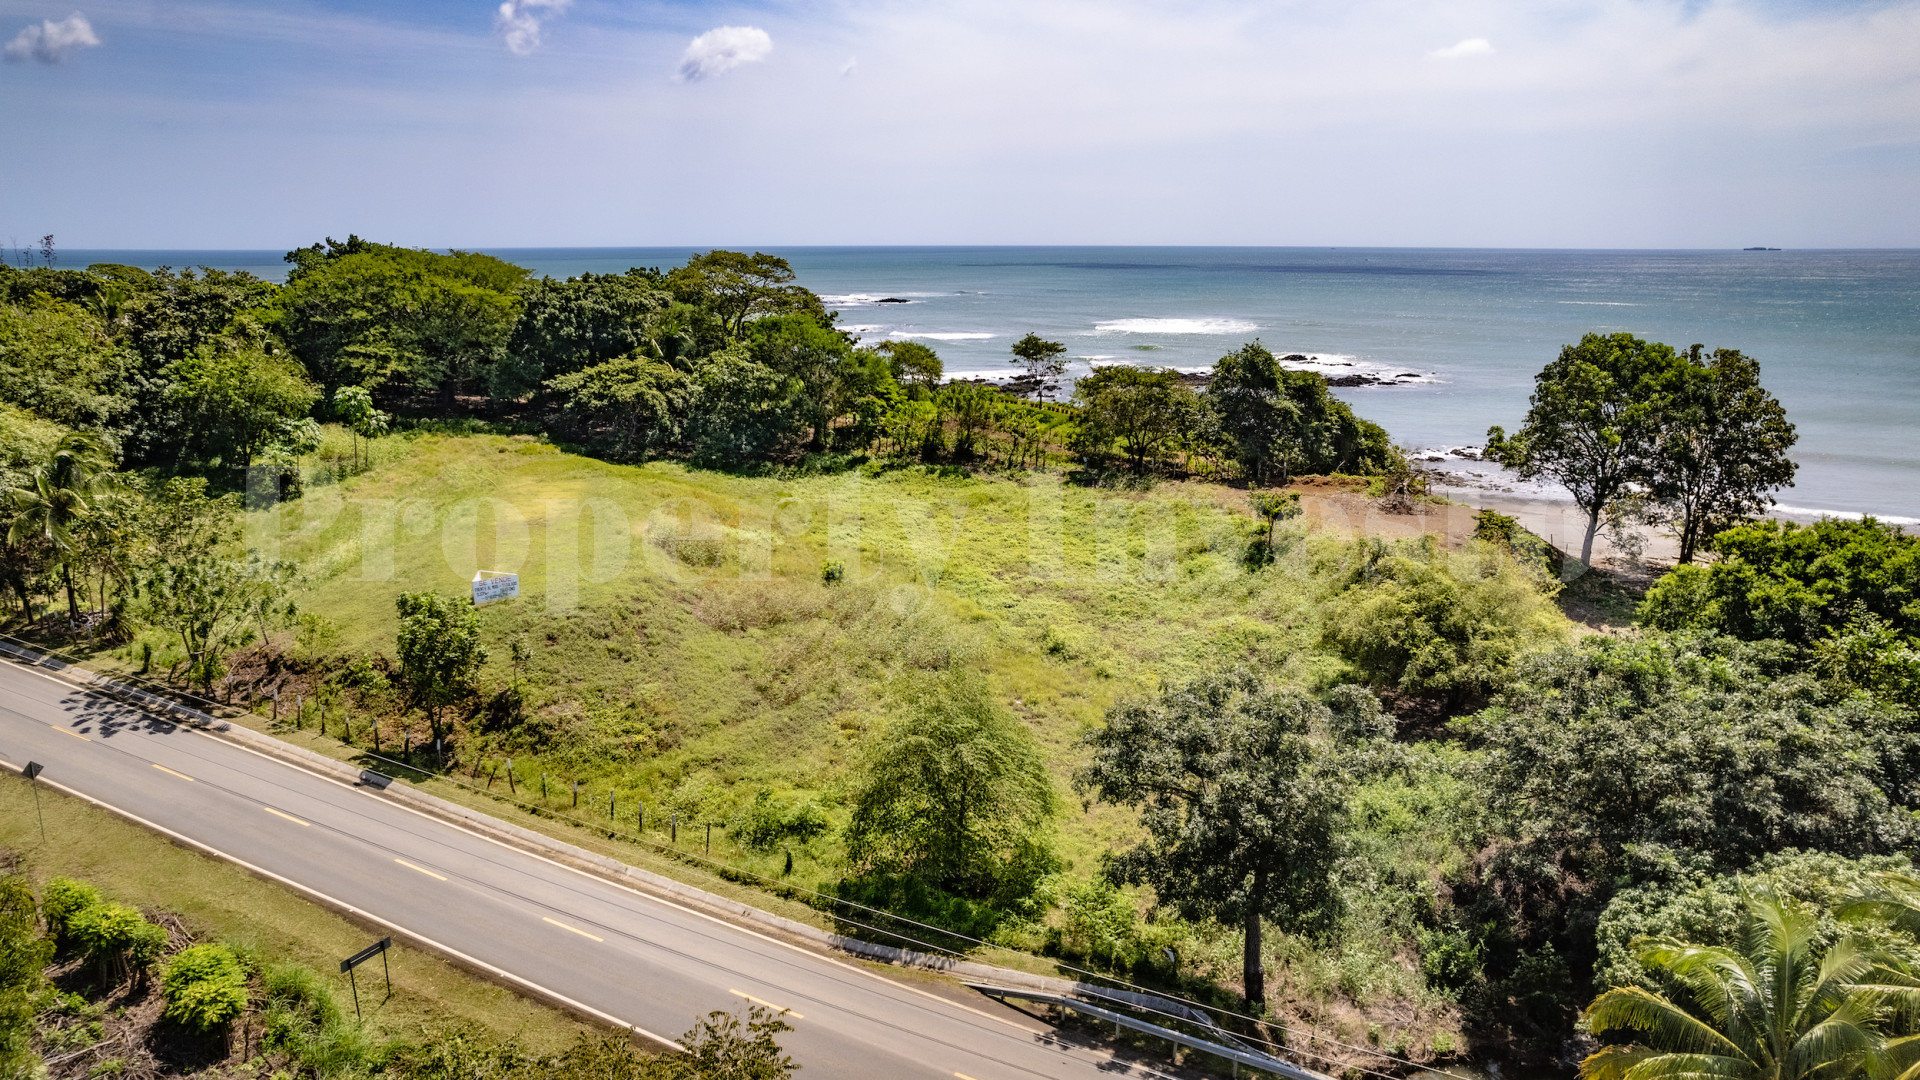 Almost 1 Hectare of Picturesque Beachfront Land for Sale in Playa Venao, Panama